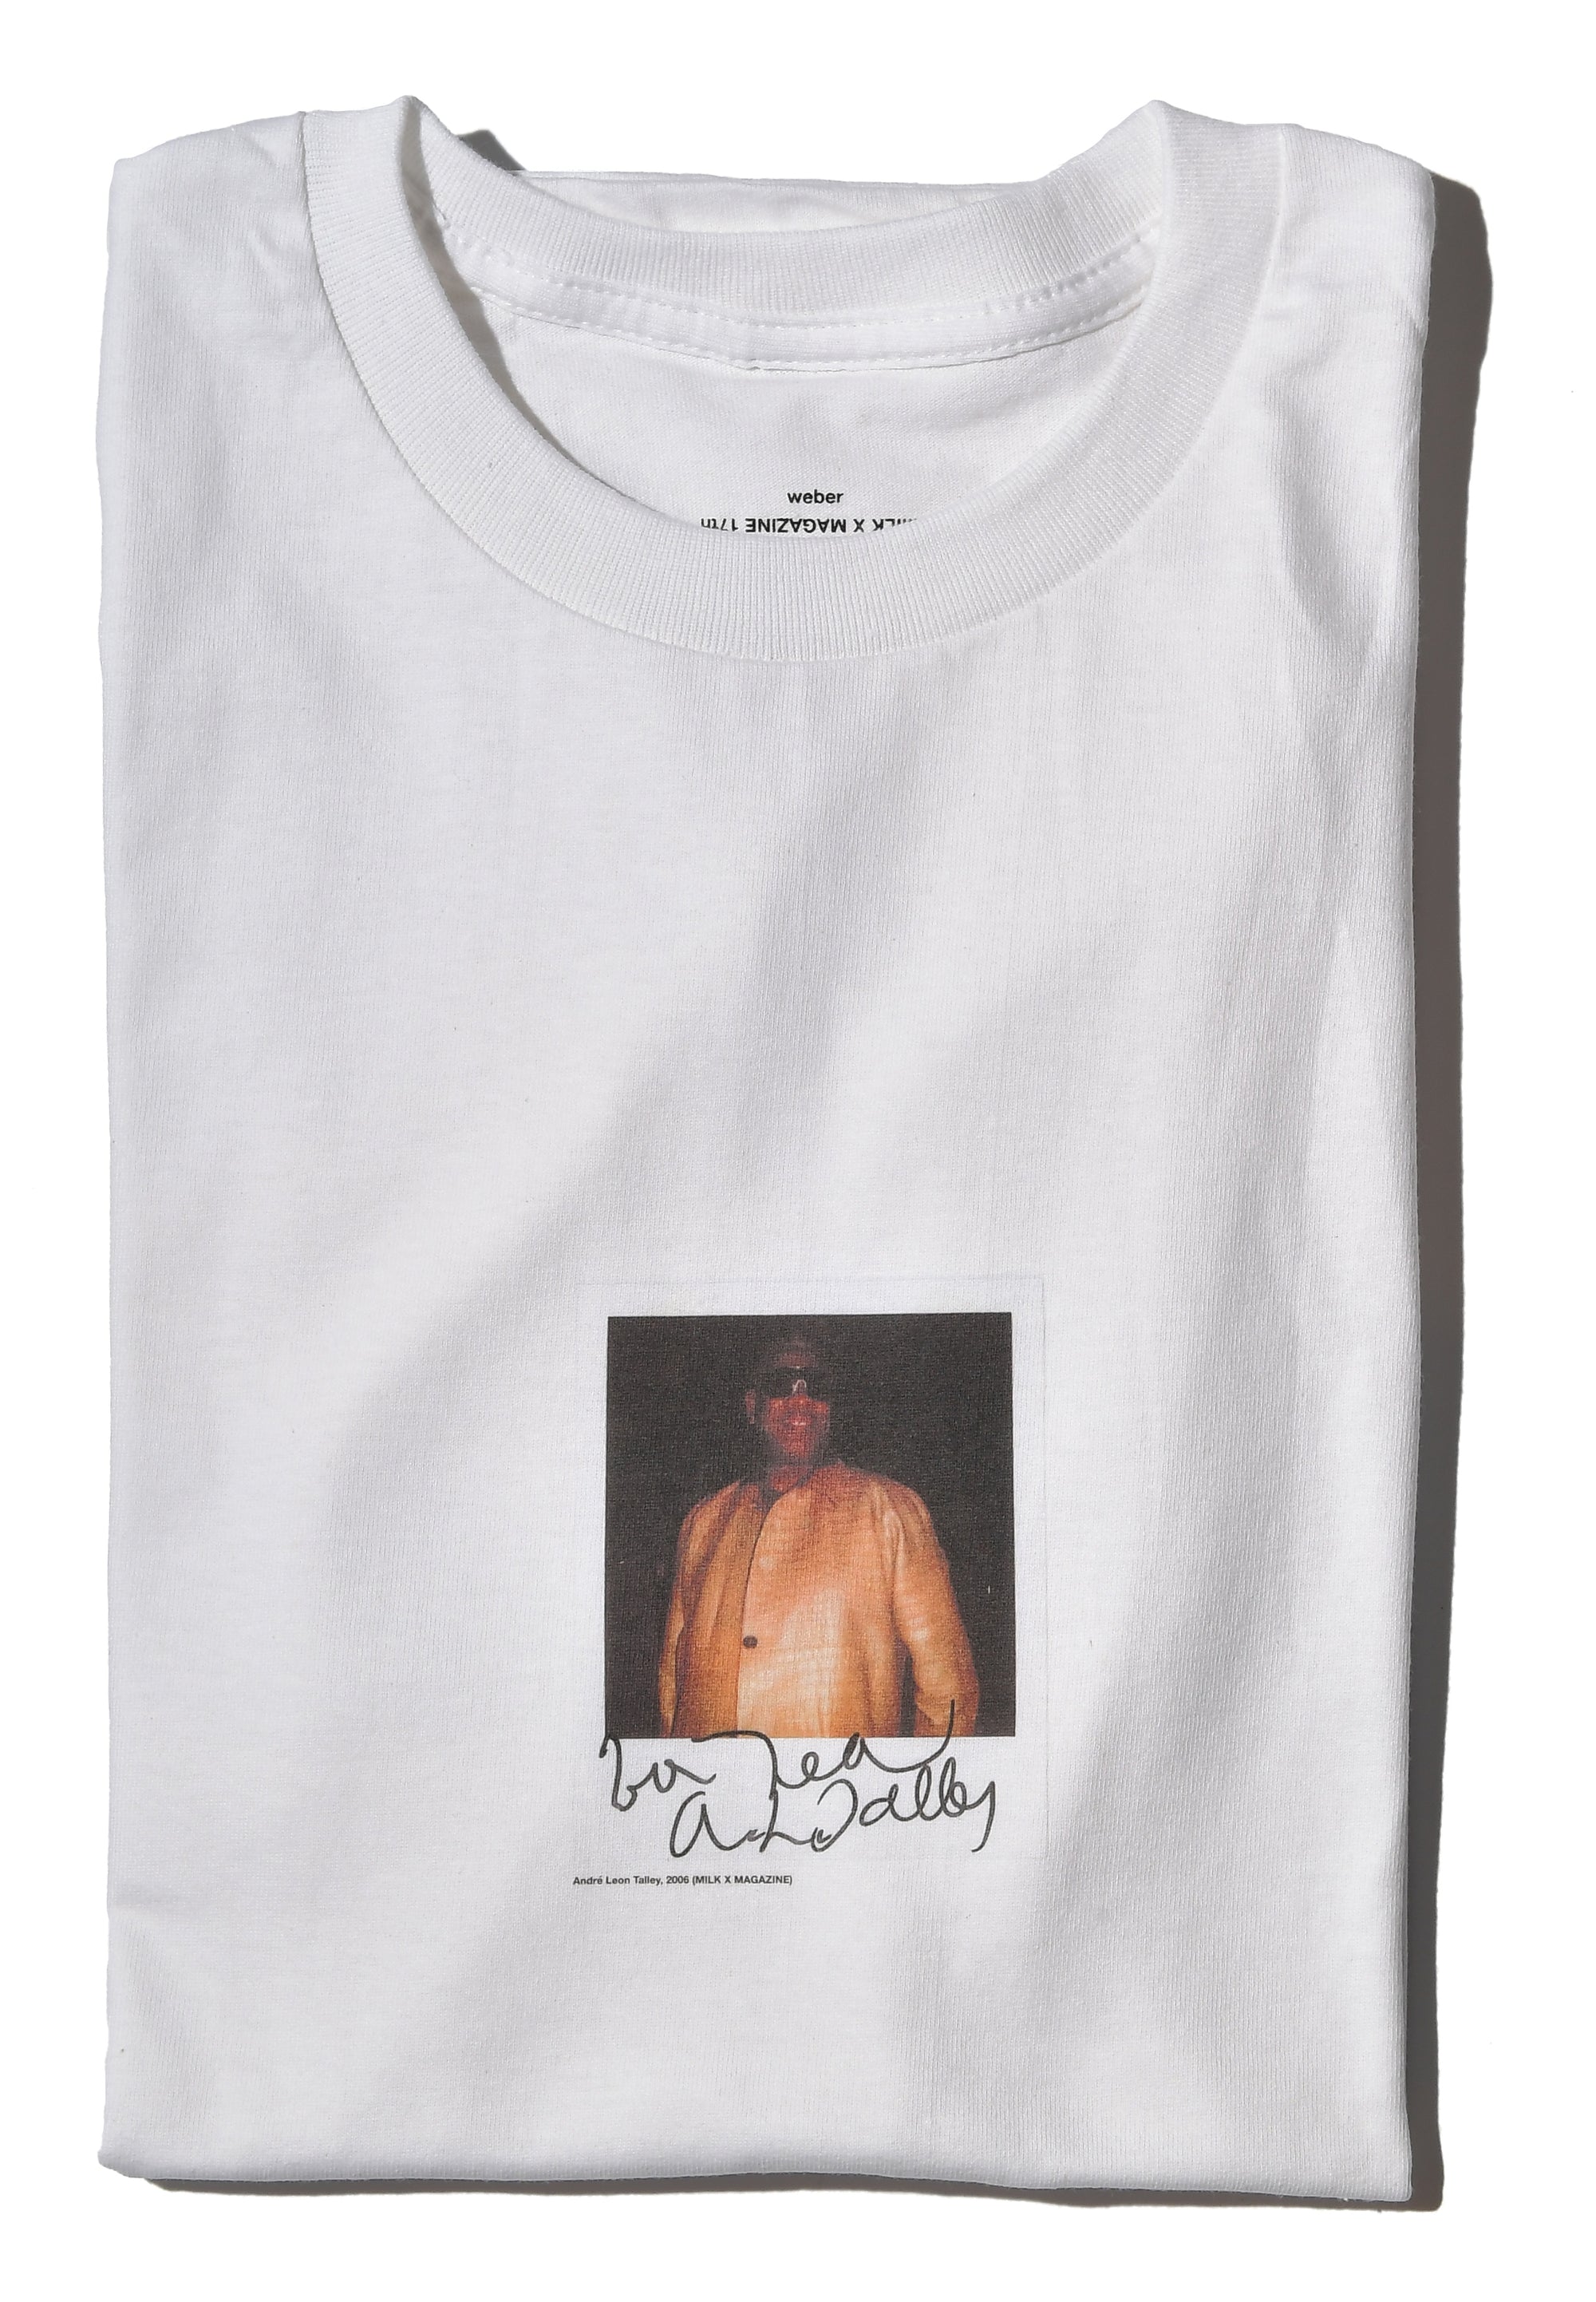 MILK X WEBER - Andre Leon Talley - (White) view 2